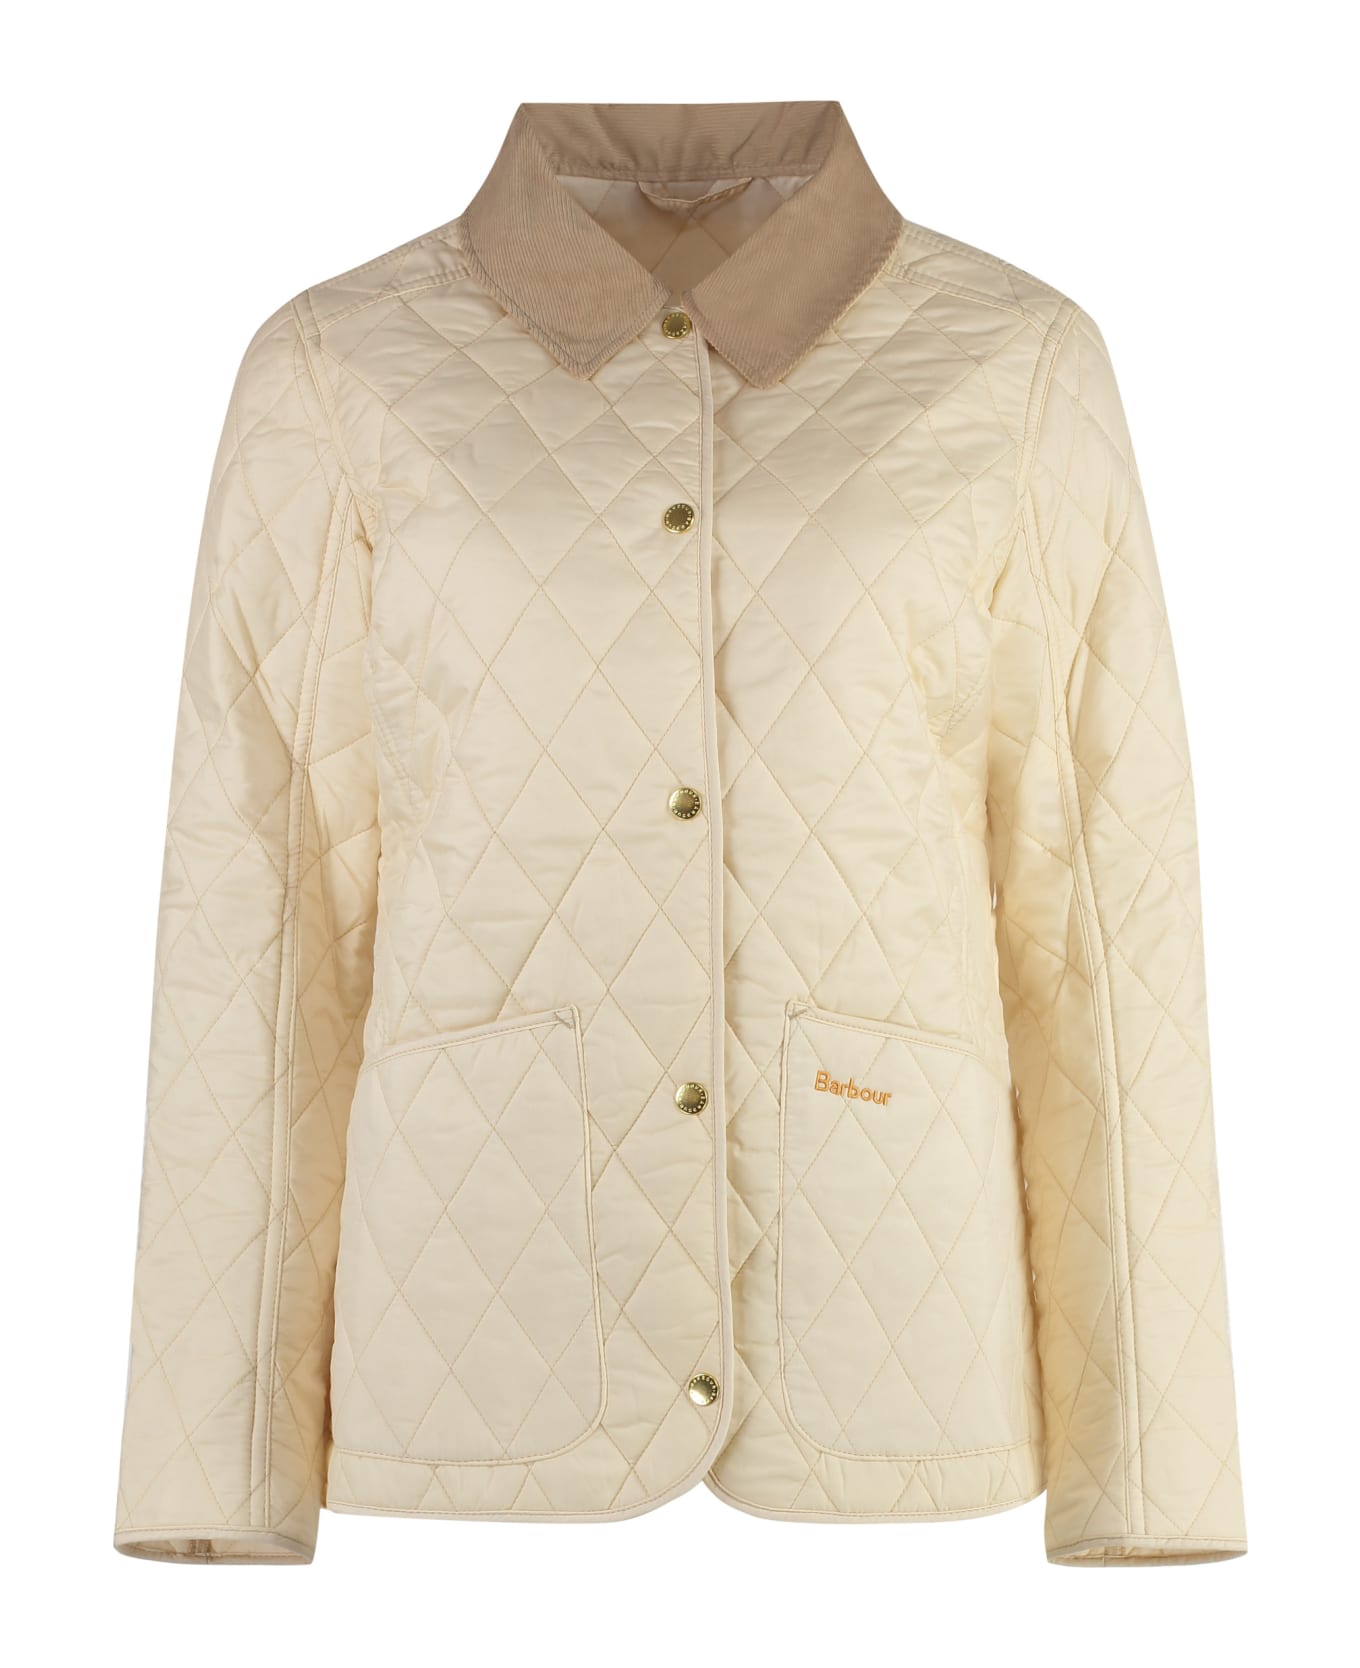 Barbour Annandale Quilted Jacket - panna